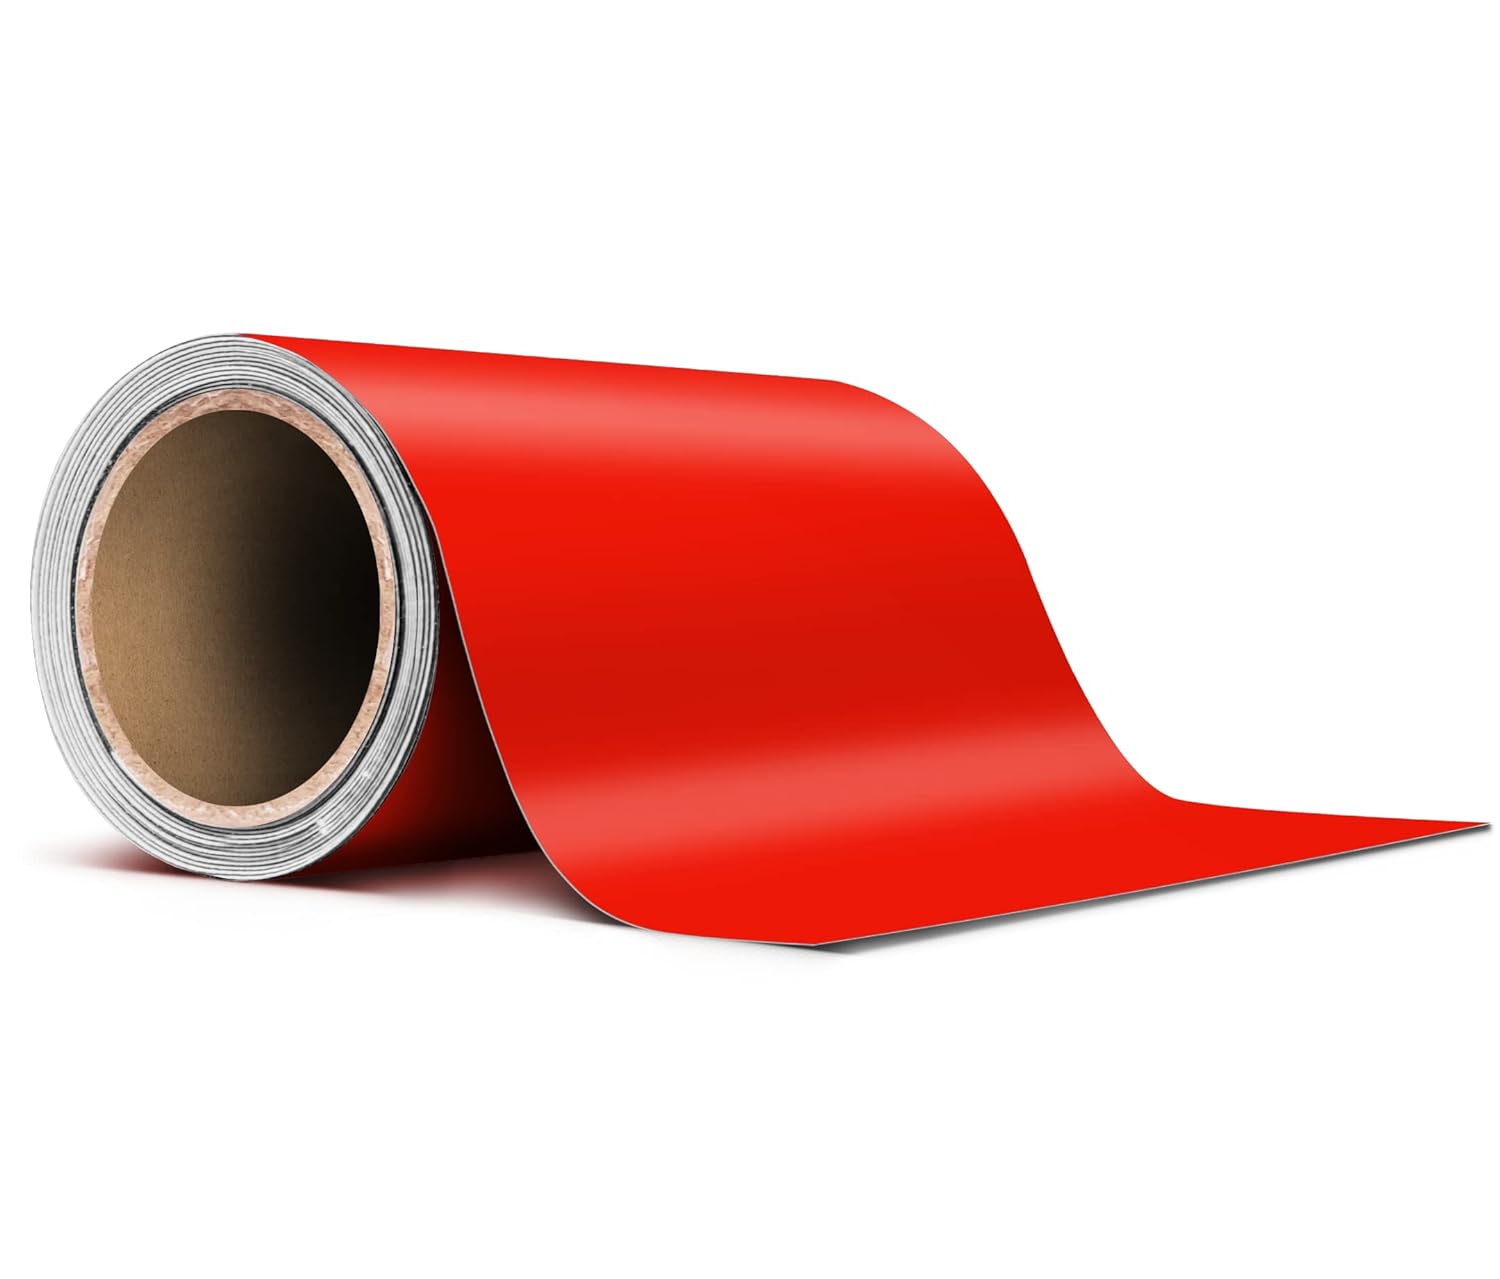 Matte Red Tape Roll for Chrome Deletes 4 Inch Thick